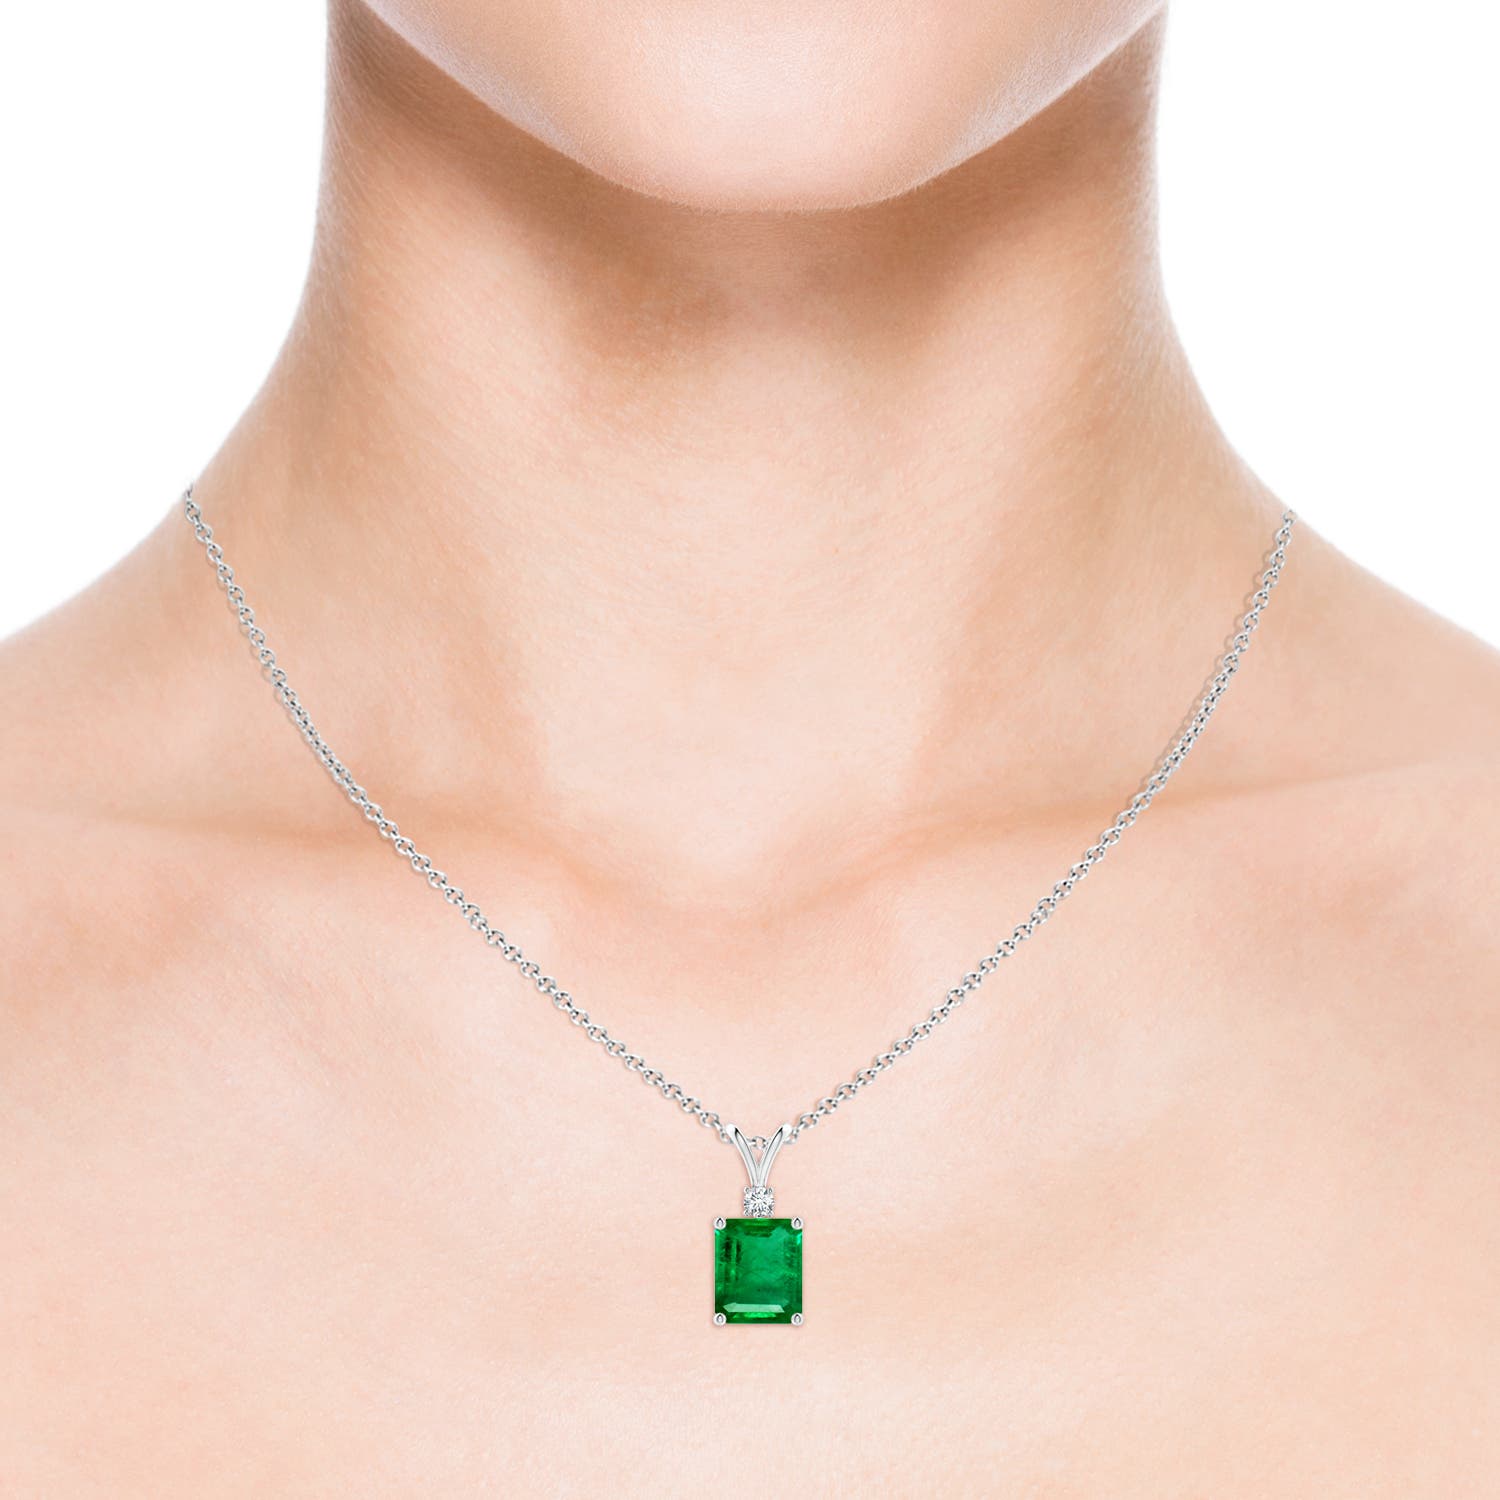 AAA - Emerald / 5.91 CT / 14 KT White Gold